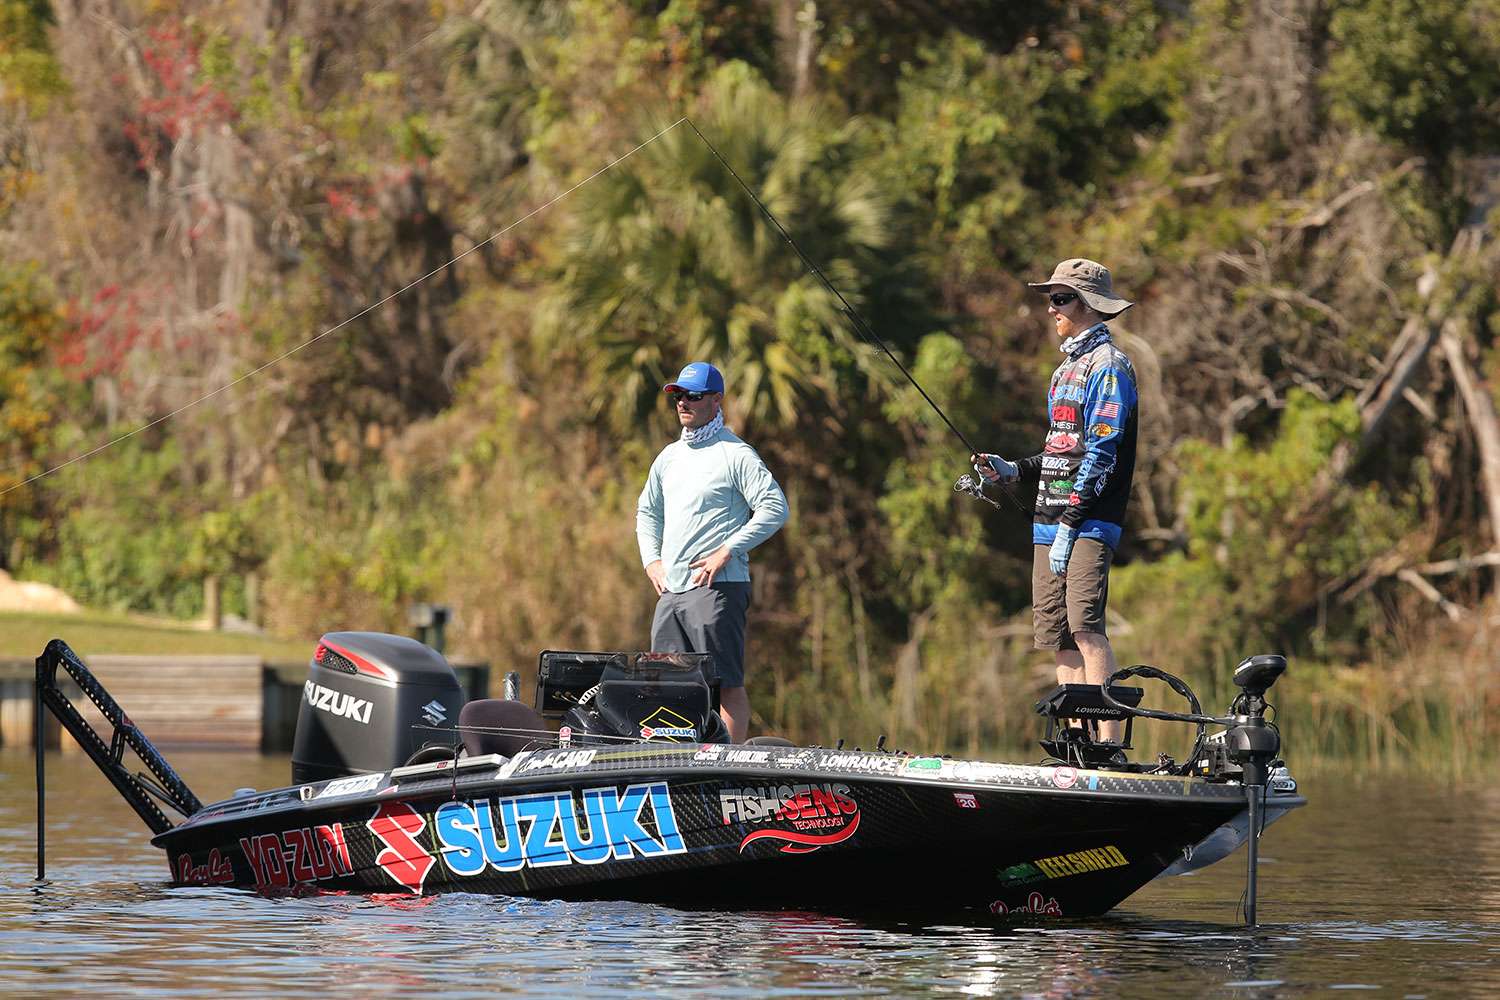 <p>Ranking his topwater lineup high in his overall arsenal, Card points out that the surface game typically starts to shine in the second half of the Elite seasons. Not that thereâs no relevance earlier in the year, but getting away from the spawn tends to bring more opportunities for surface bites. From fry guarders, to bream beds, to fish chilling under shady mats, these are the times he feels most optimistic about topwater success.</p>

<p>âI can cover a lot of water with topwaters,â Card said. âI get the quantity, but a topwater also gets you quality. It seems like the bigger fish want to feed upward, so the average size fish seems to be bigger with topwaters.â</p>